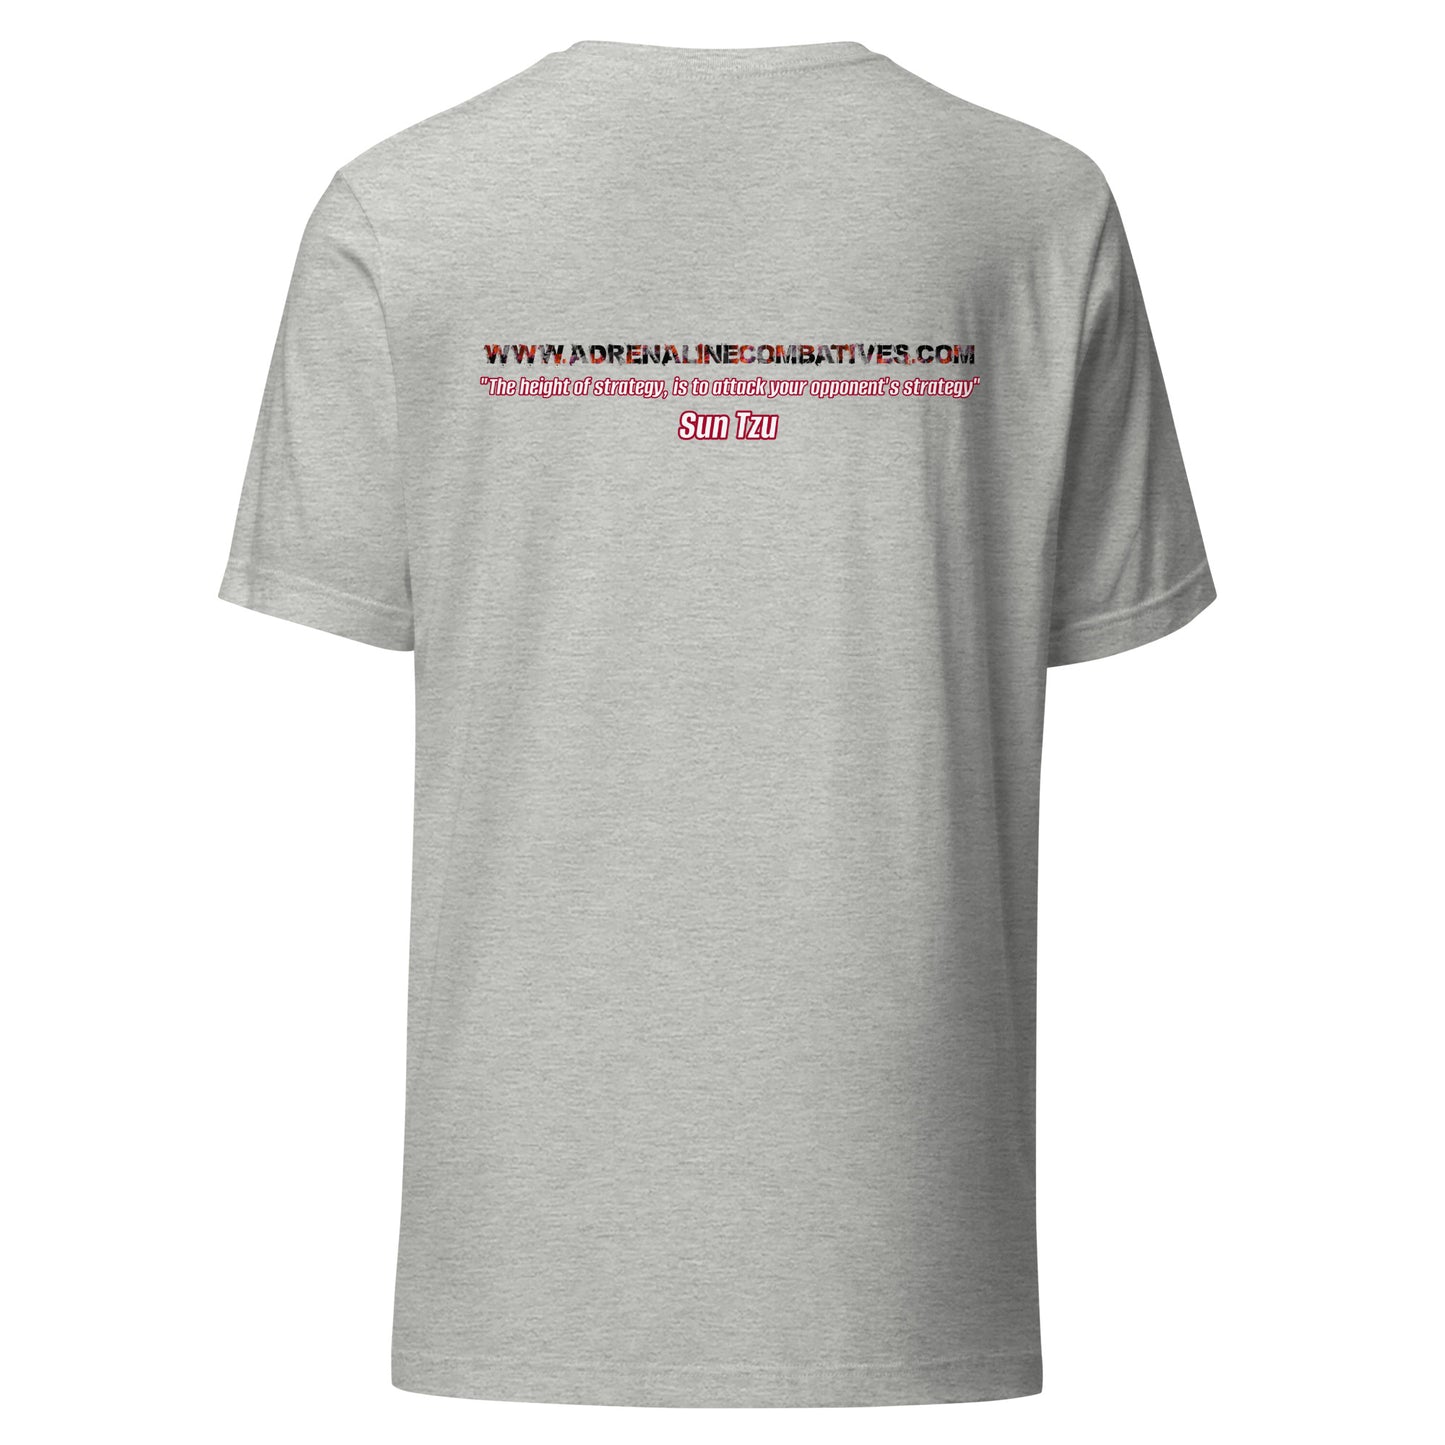 Unisex t-shirt - Adrenaline Combatives - Sun Tzu Quote: "The height of strategy, is to attack your opponent's strategy"